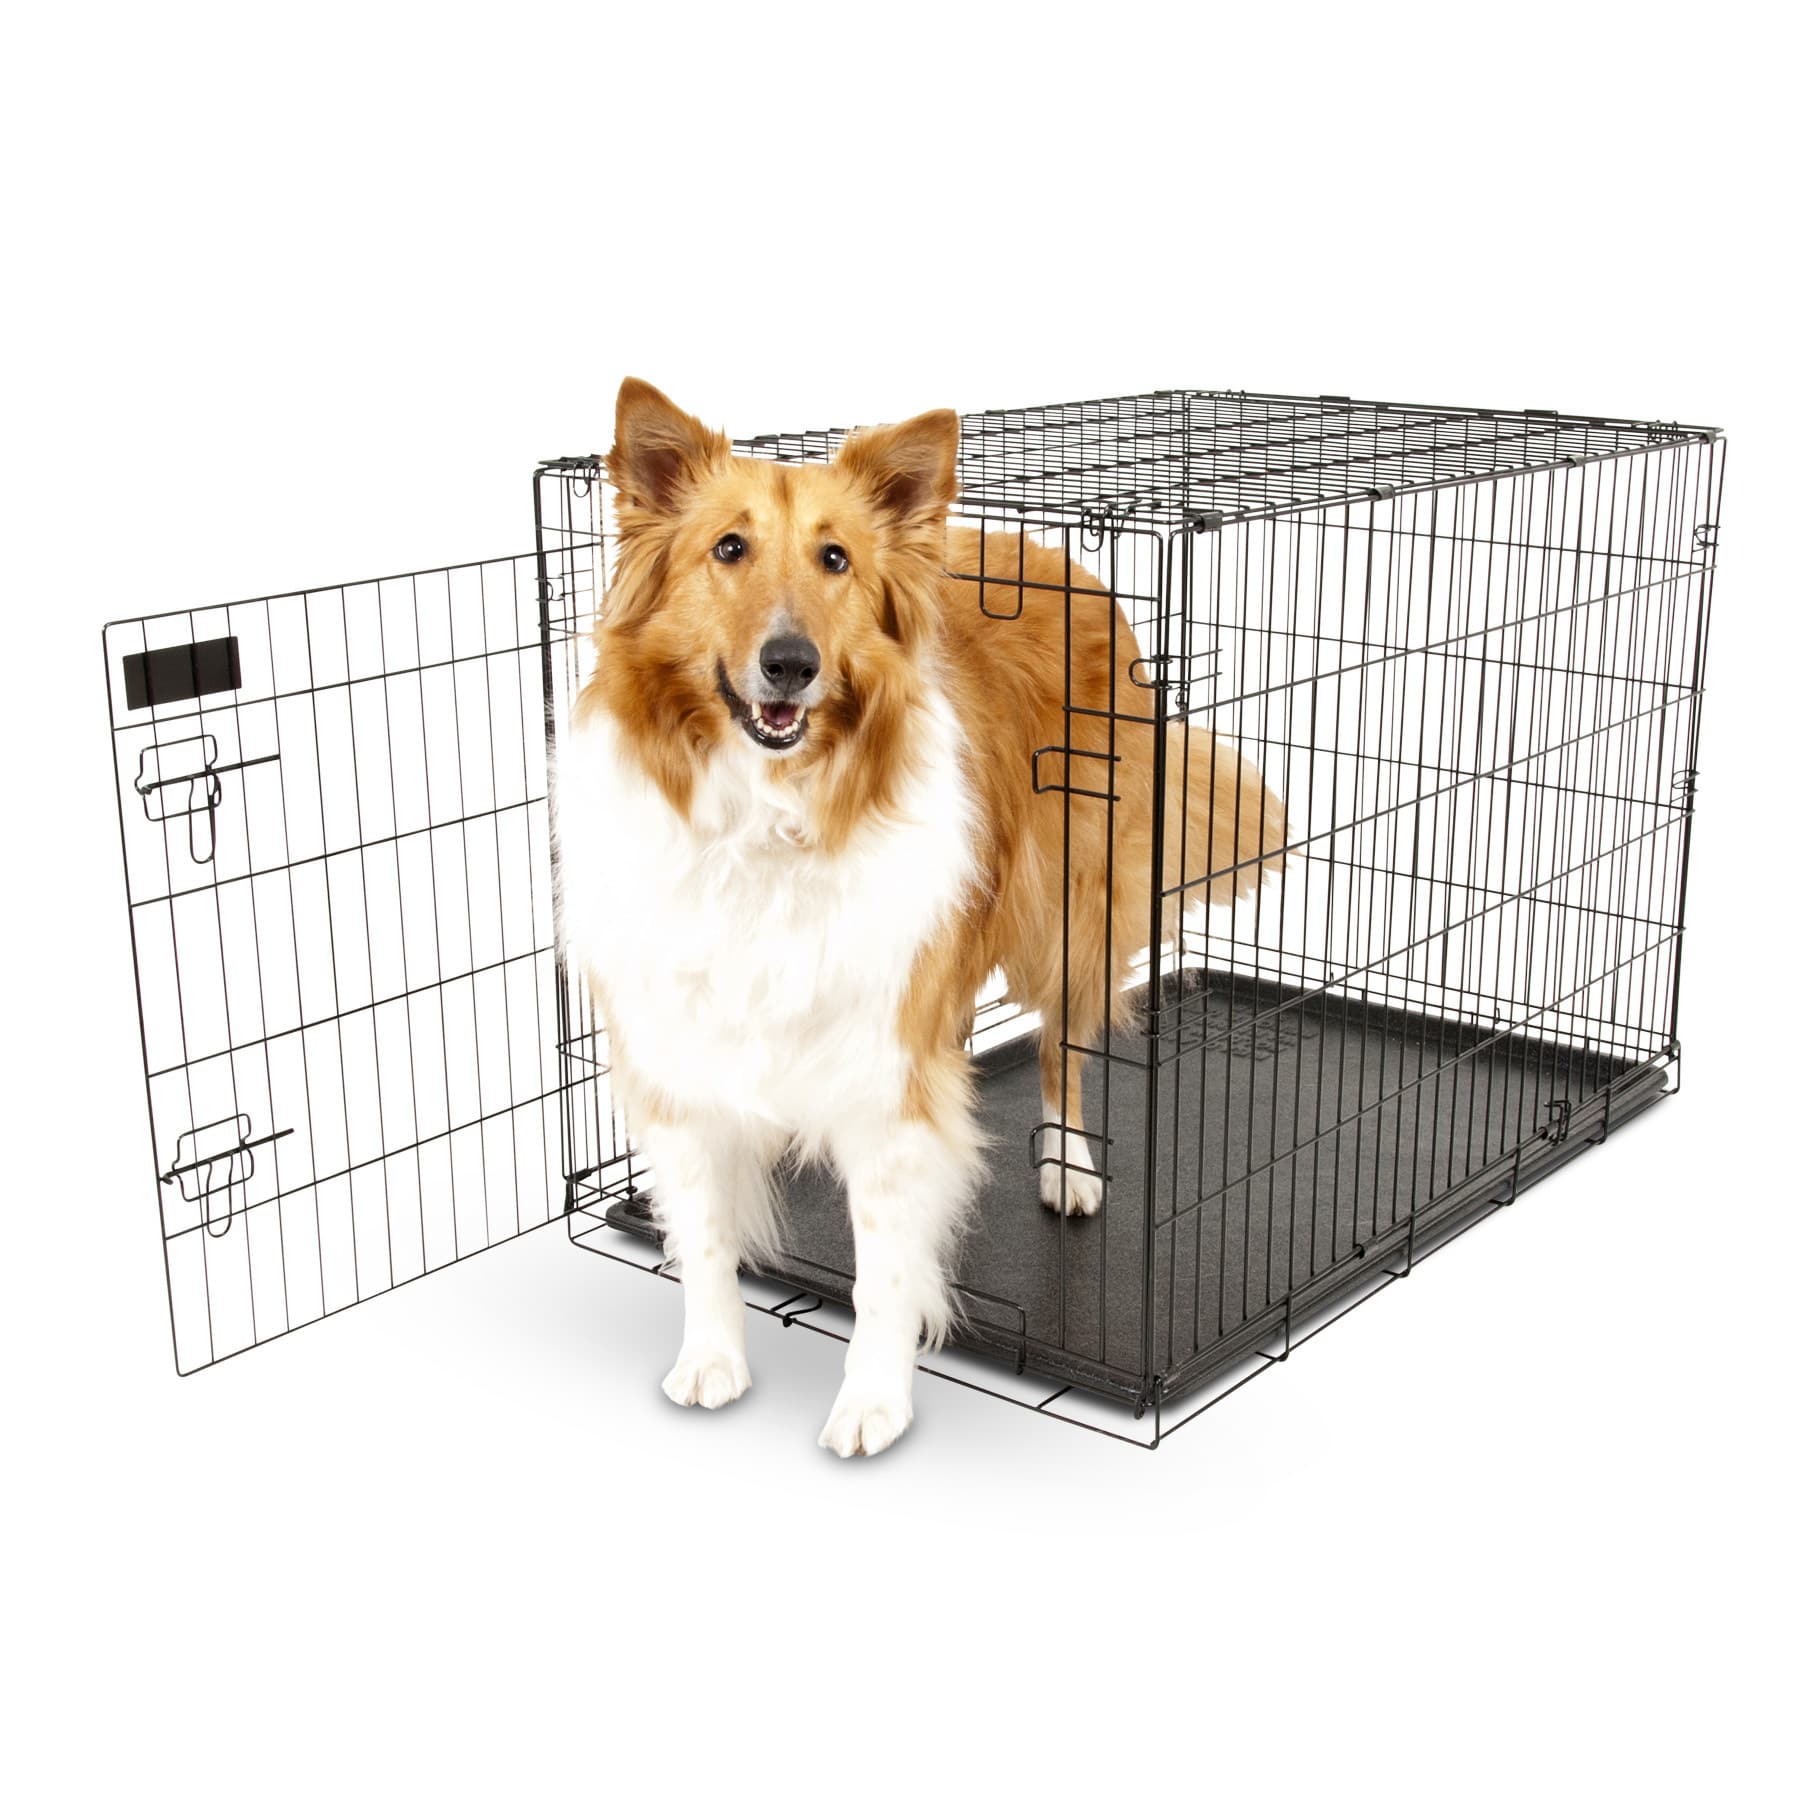 Aspen Pet Wire Home Training Dog Kennel